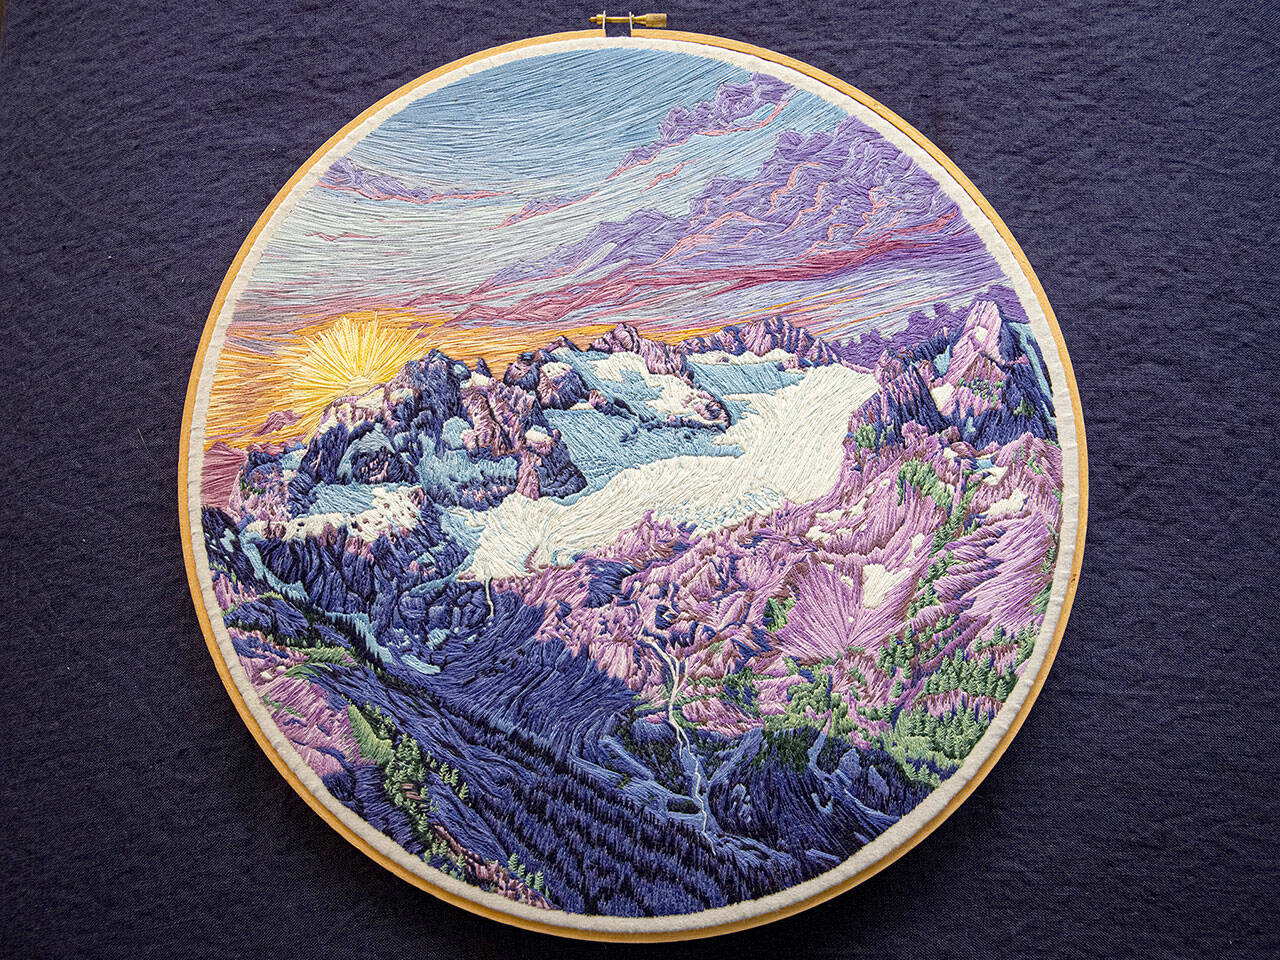 “Geri-Freki Glacier,” by Kait Evensen, is among the artwork in the “Terminus: A Glacier Memorial Project.”